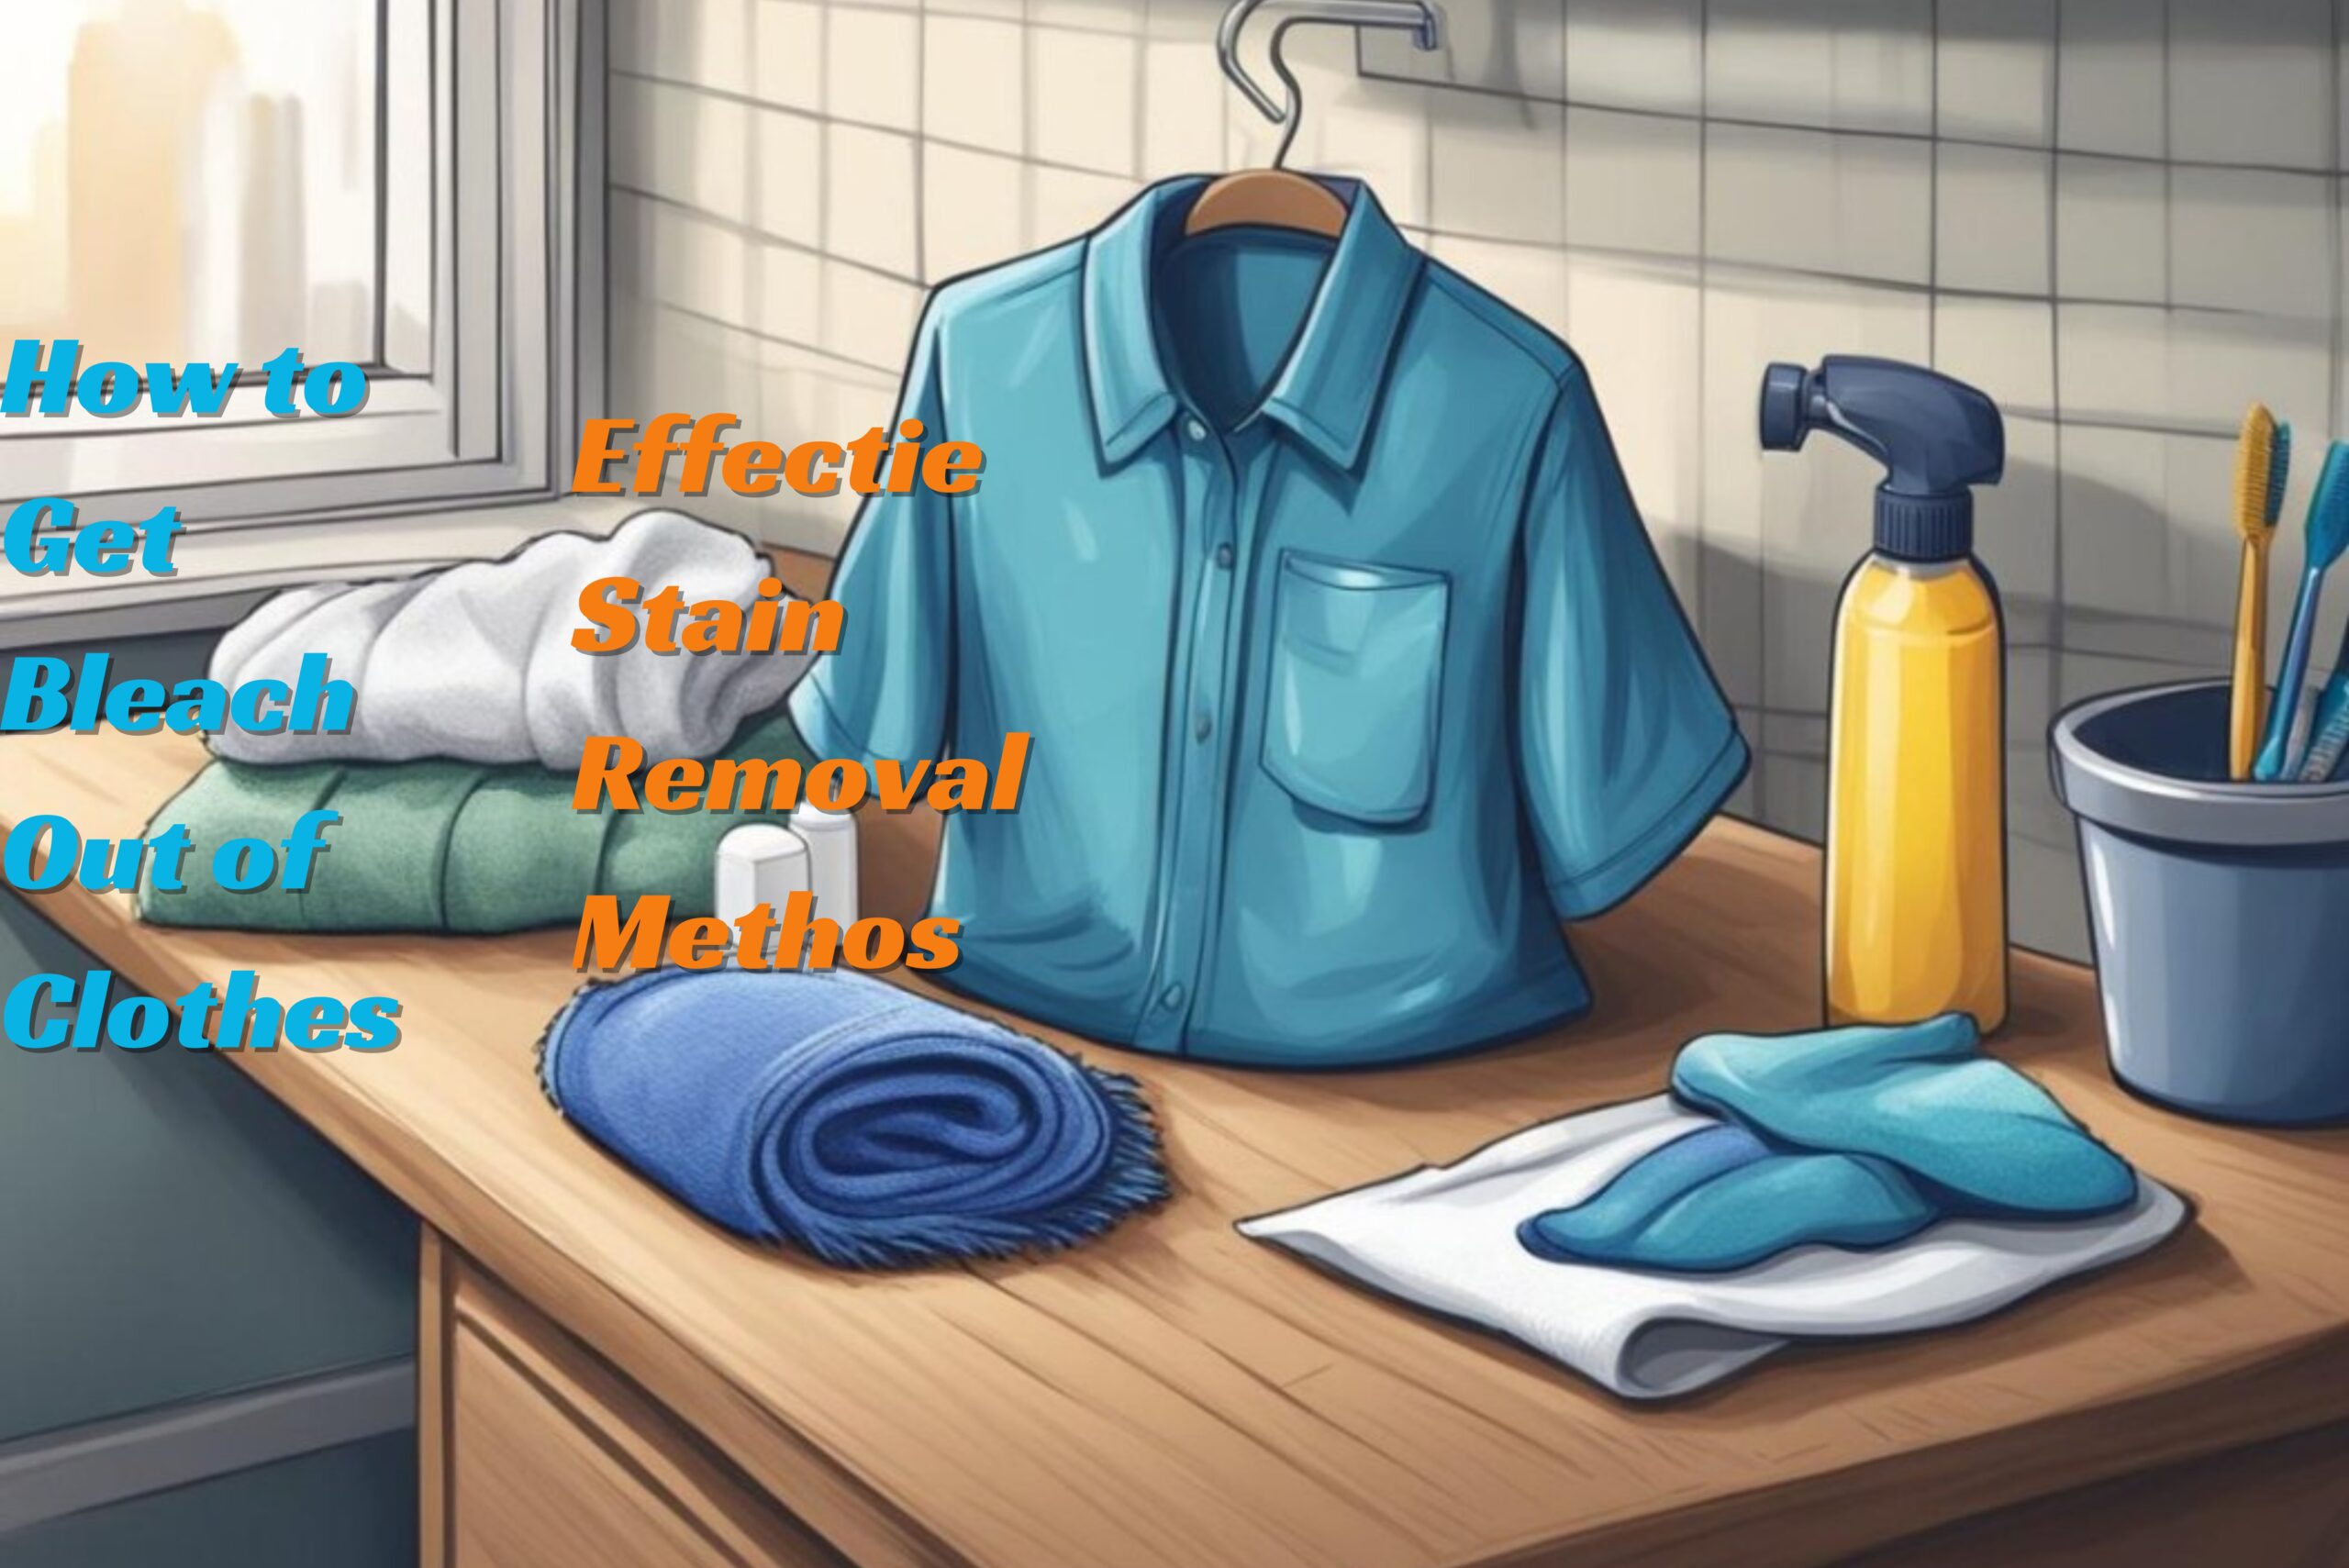 How to Get Bleach Out of Clothes Effective Stain Removal Methods